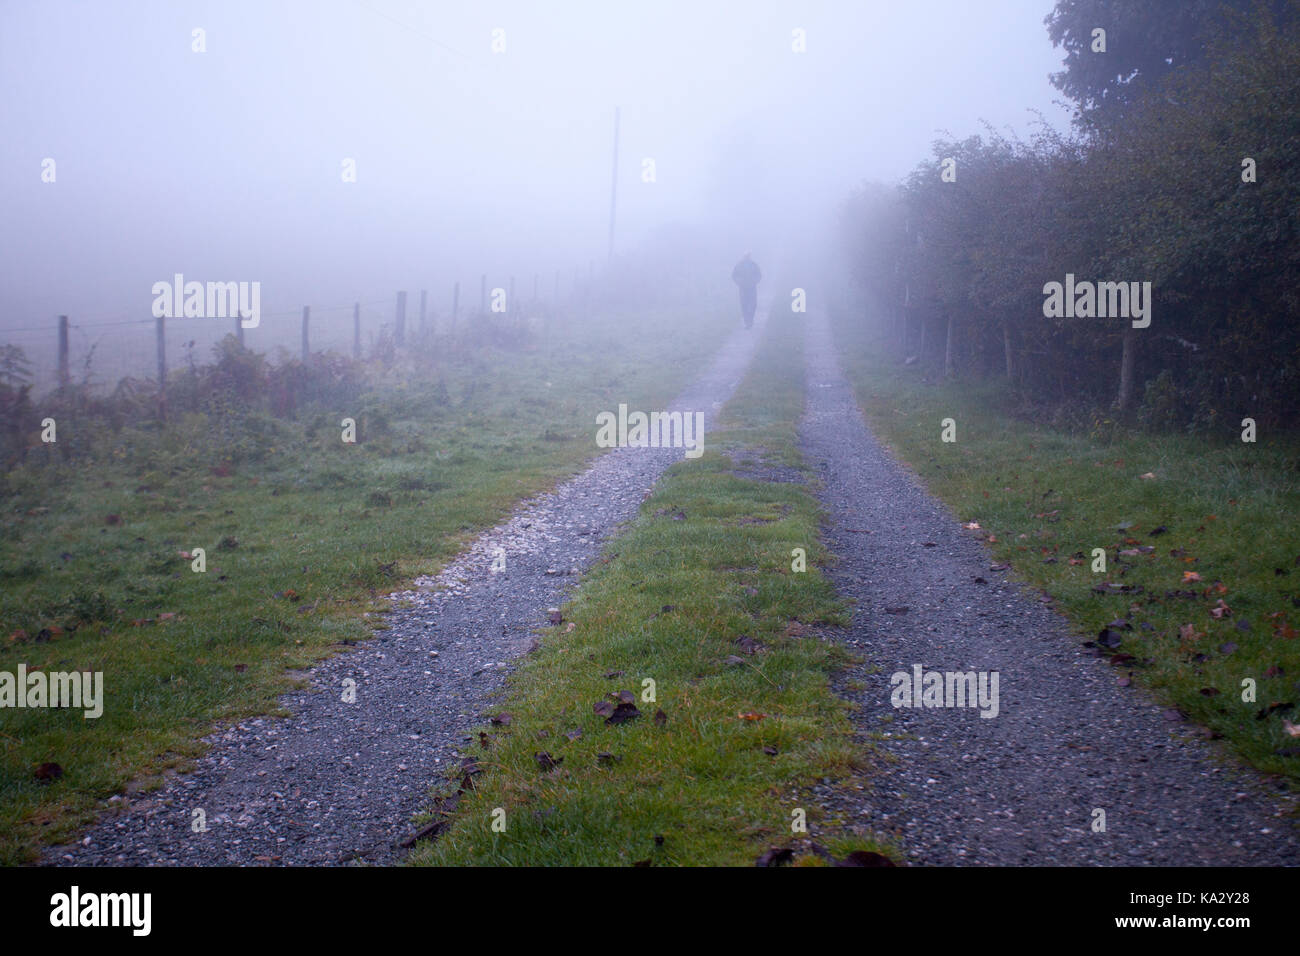 Flintshire, North Wales, UK Weather.  After a spell of torrential rain during the evening the morning begins with a heavy dew and dense fog in Flintshire NorthWales as this person discovered walking near the village of Moel y crio. Stock Photo